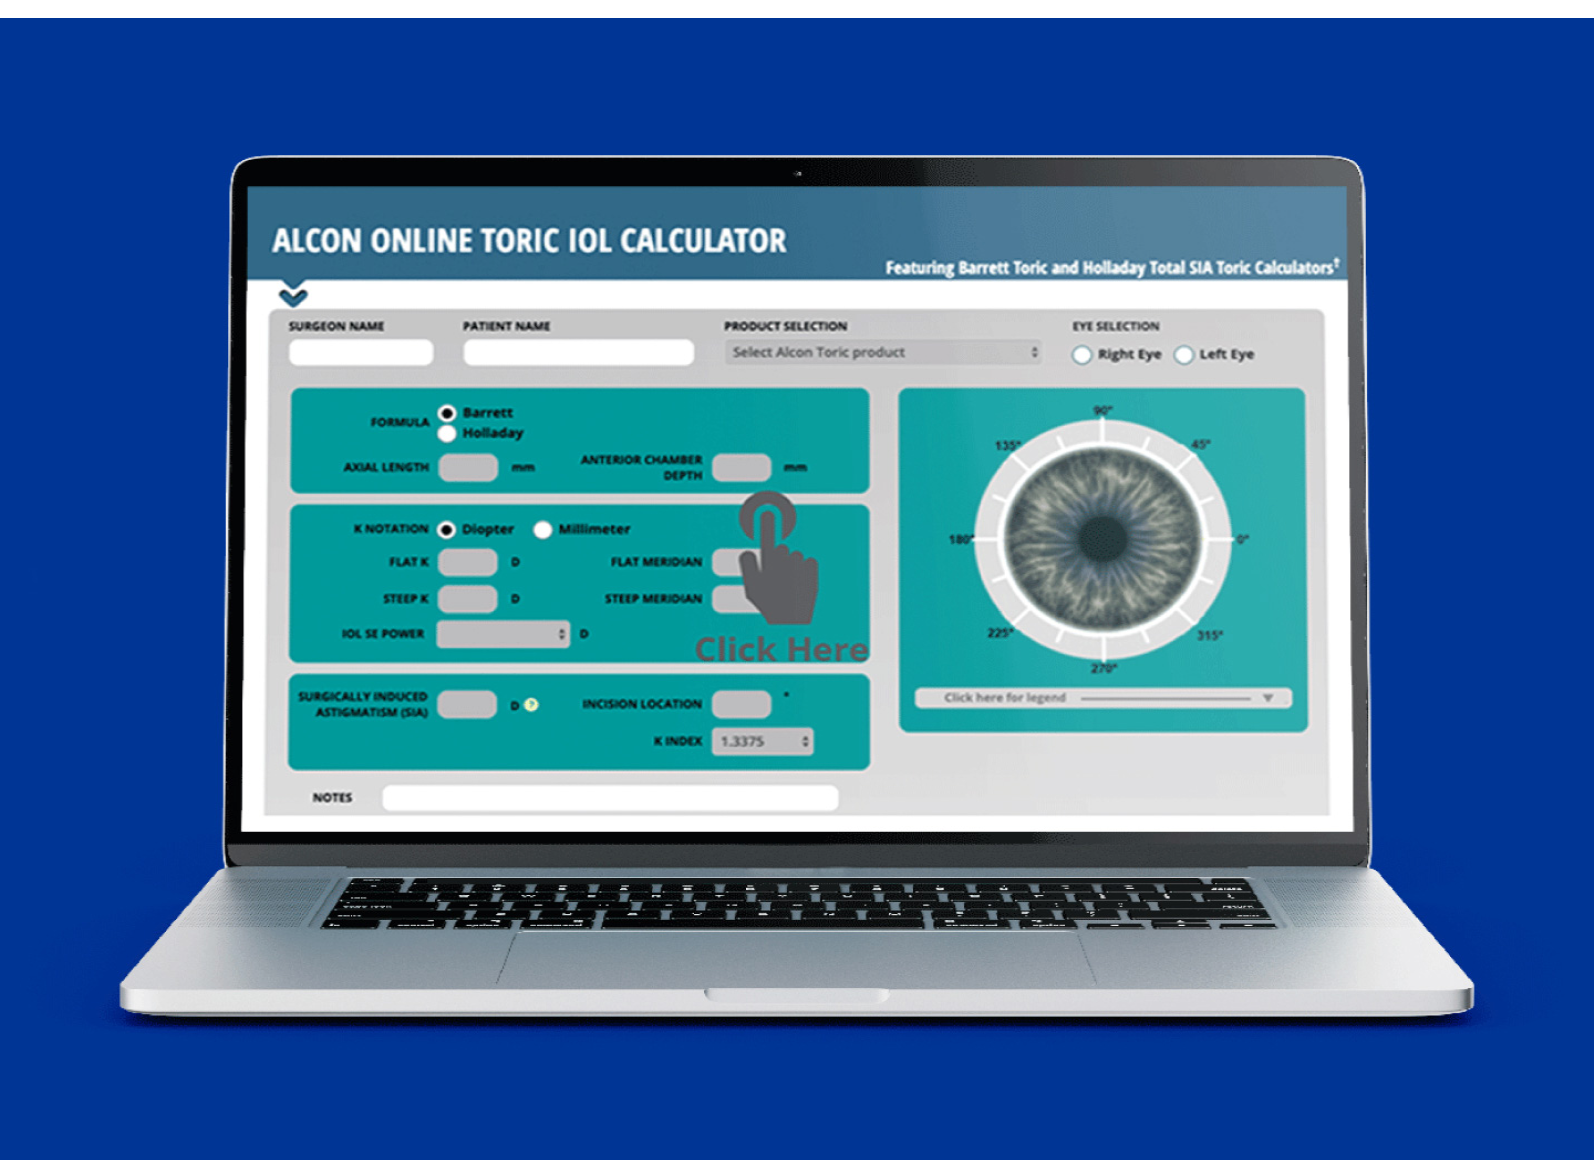 Open laptop with the Alcon Online Toric IOL Calculator featured on the screen.